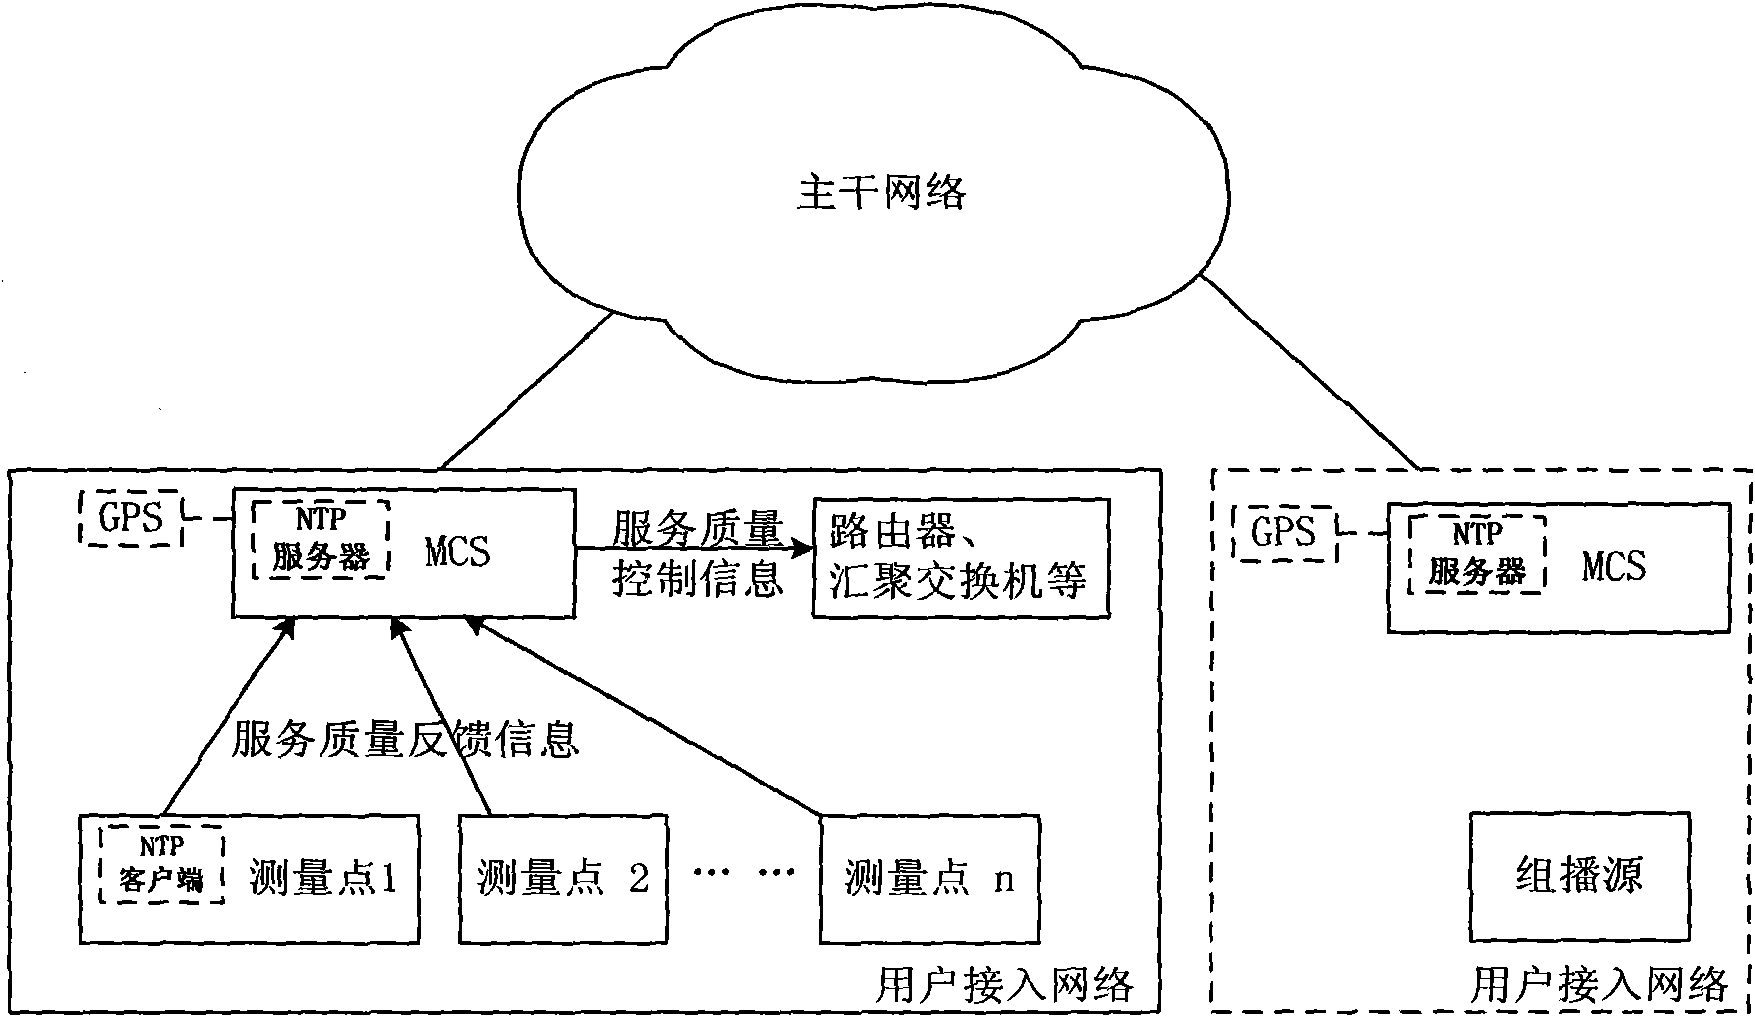 Method for measuring multimedia multicast service quality based on client